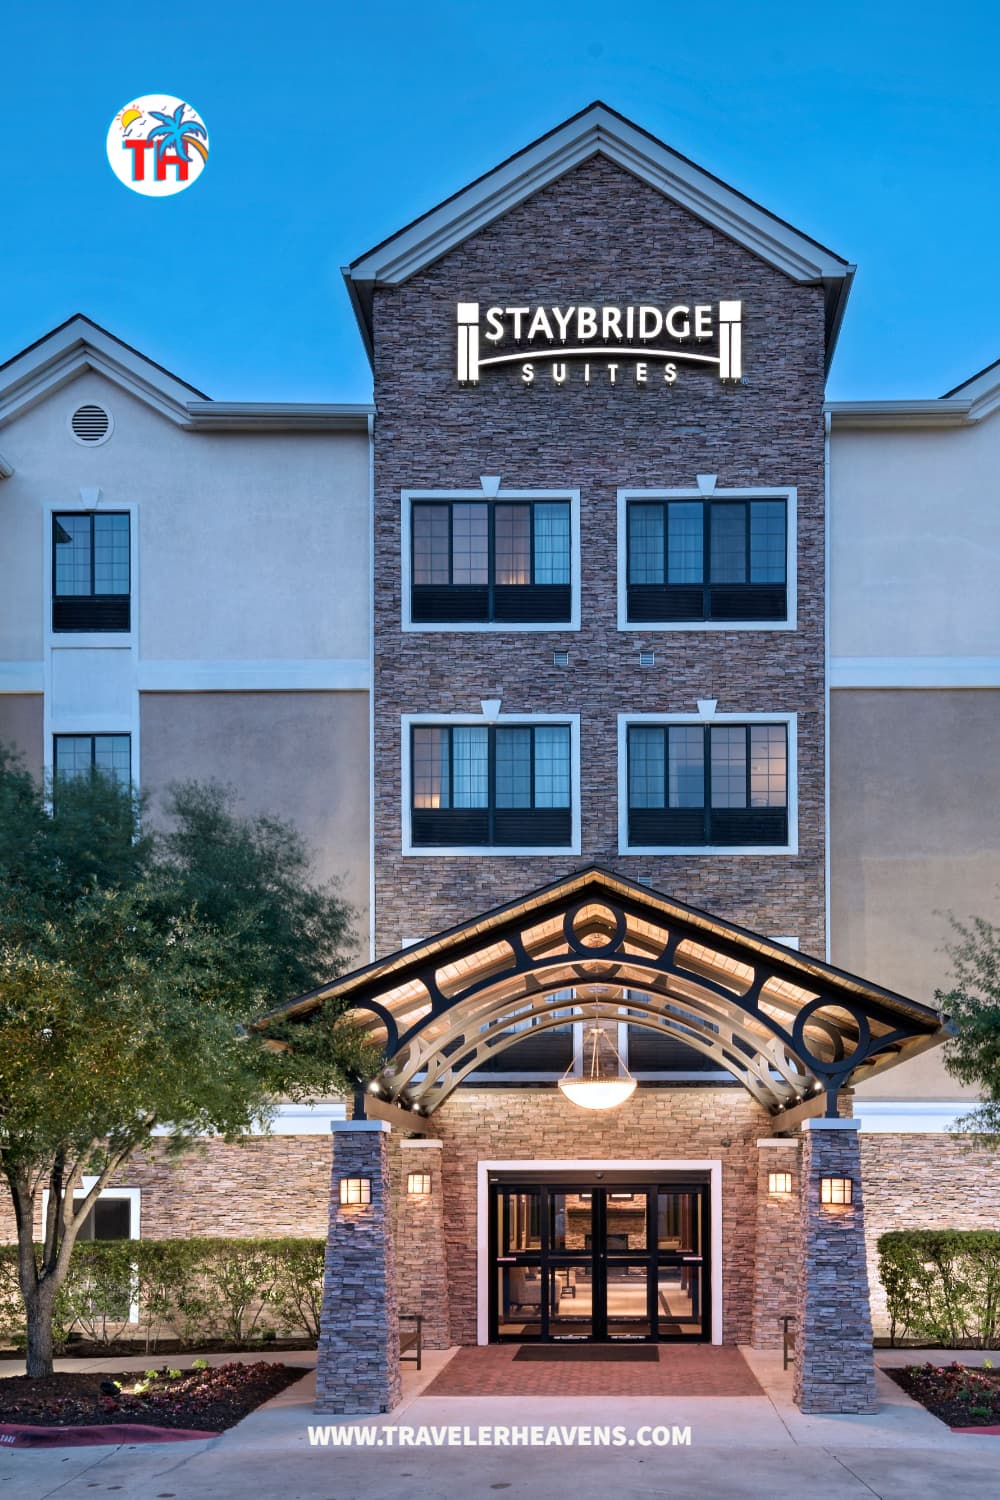 Hotels, Round Rock, round rock hotels with indoor pool, Texas Travel Guide, Travel to Texas, Visit Round Rock